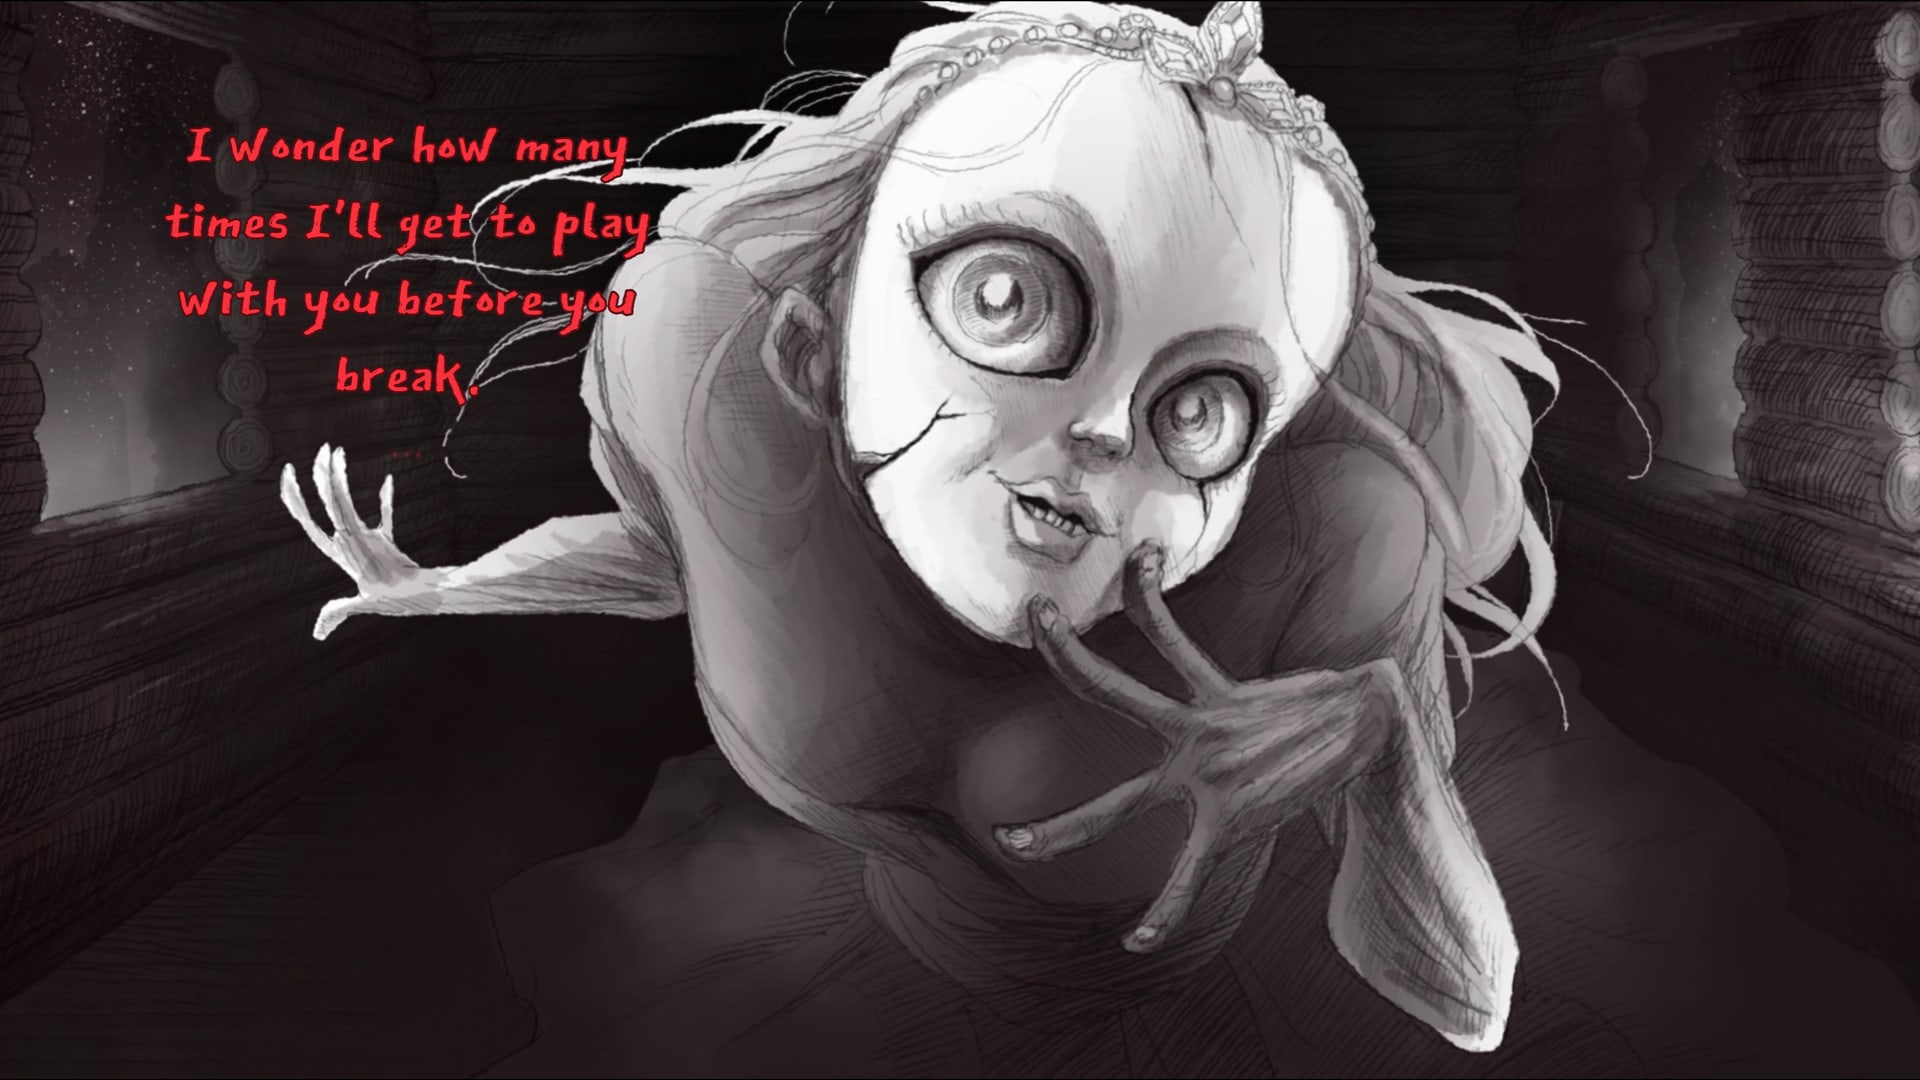 Screenshot of the princess with a cracked porcelain mask close up to the camera saying "I wonder how many times I'll get to play with you before you break." the text is bright red while everything else is in black and white